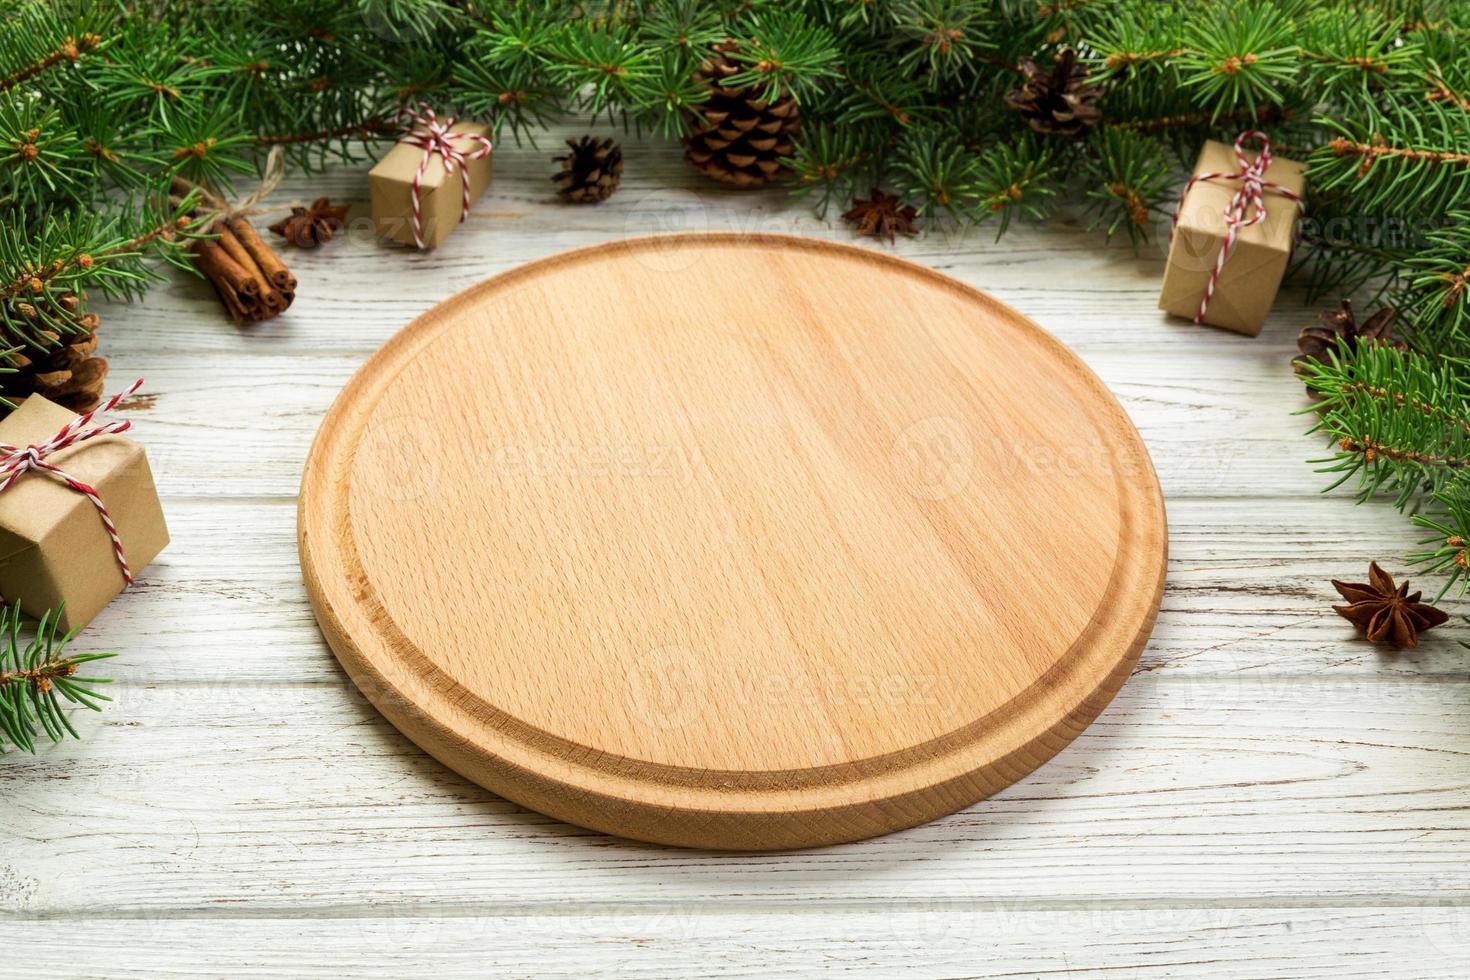 Perspective view. Empty wood round plate on wooden christmas background. holiday dinner dish concept with new year decor photo